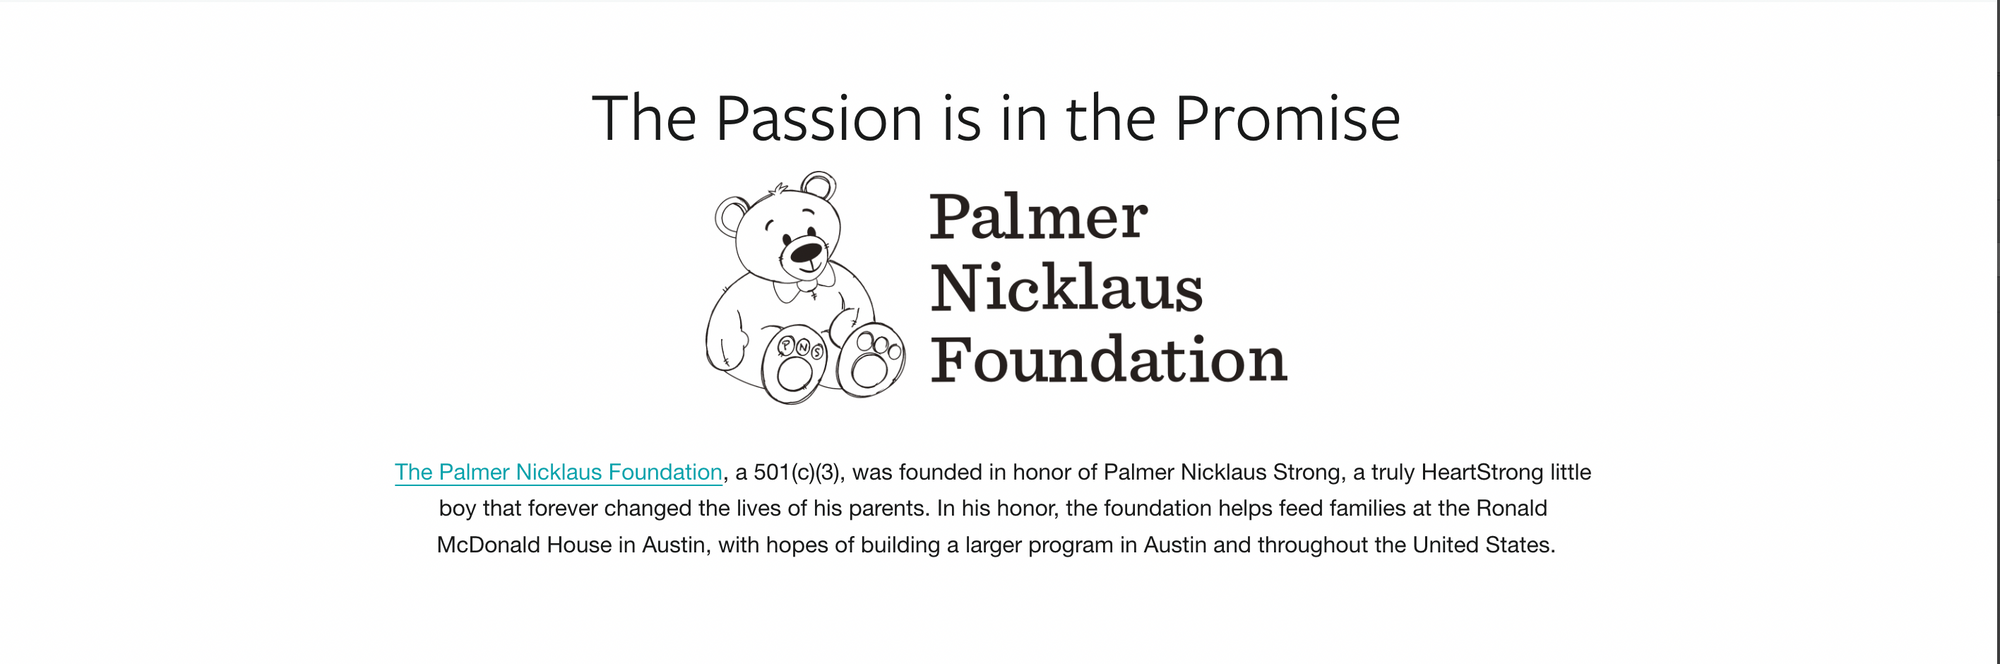 a image of bear with text written Palmer Nicklaus Foundation